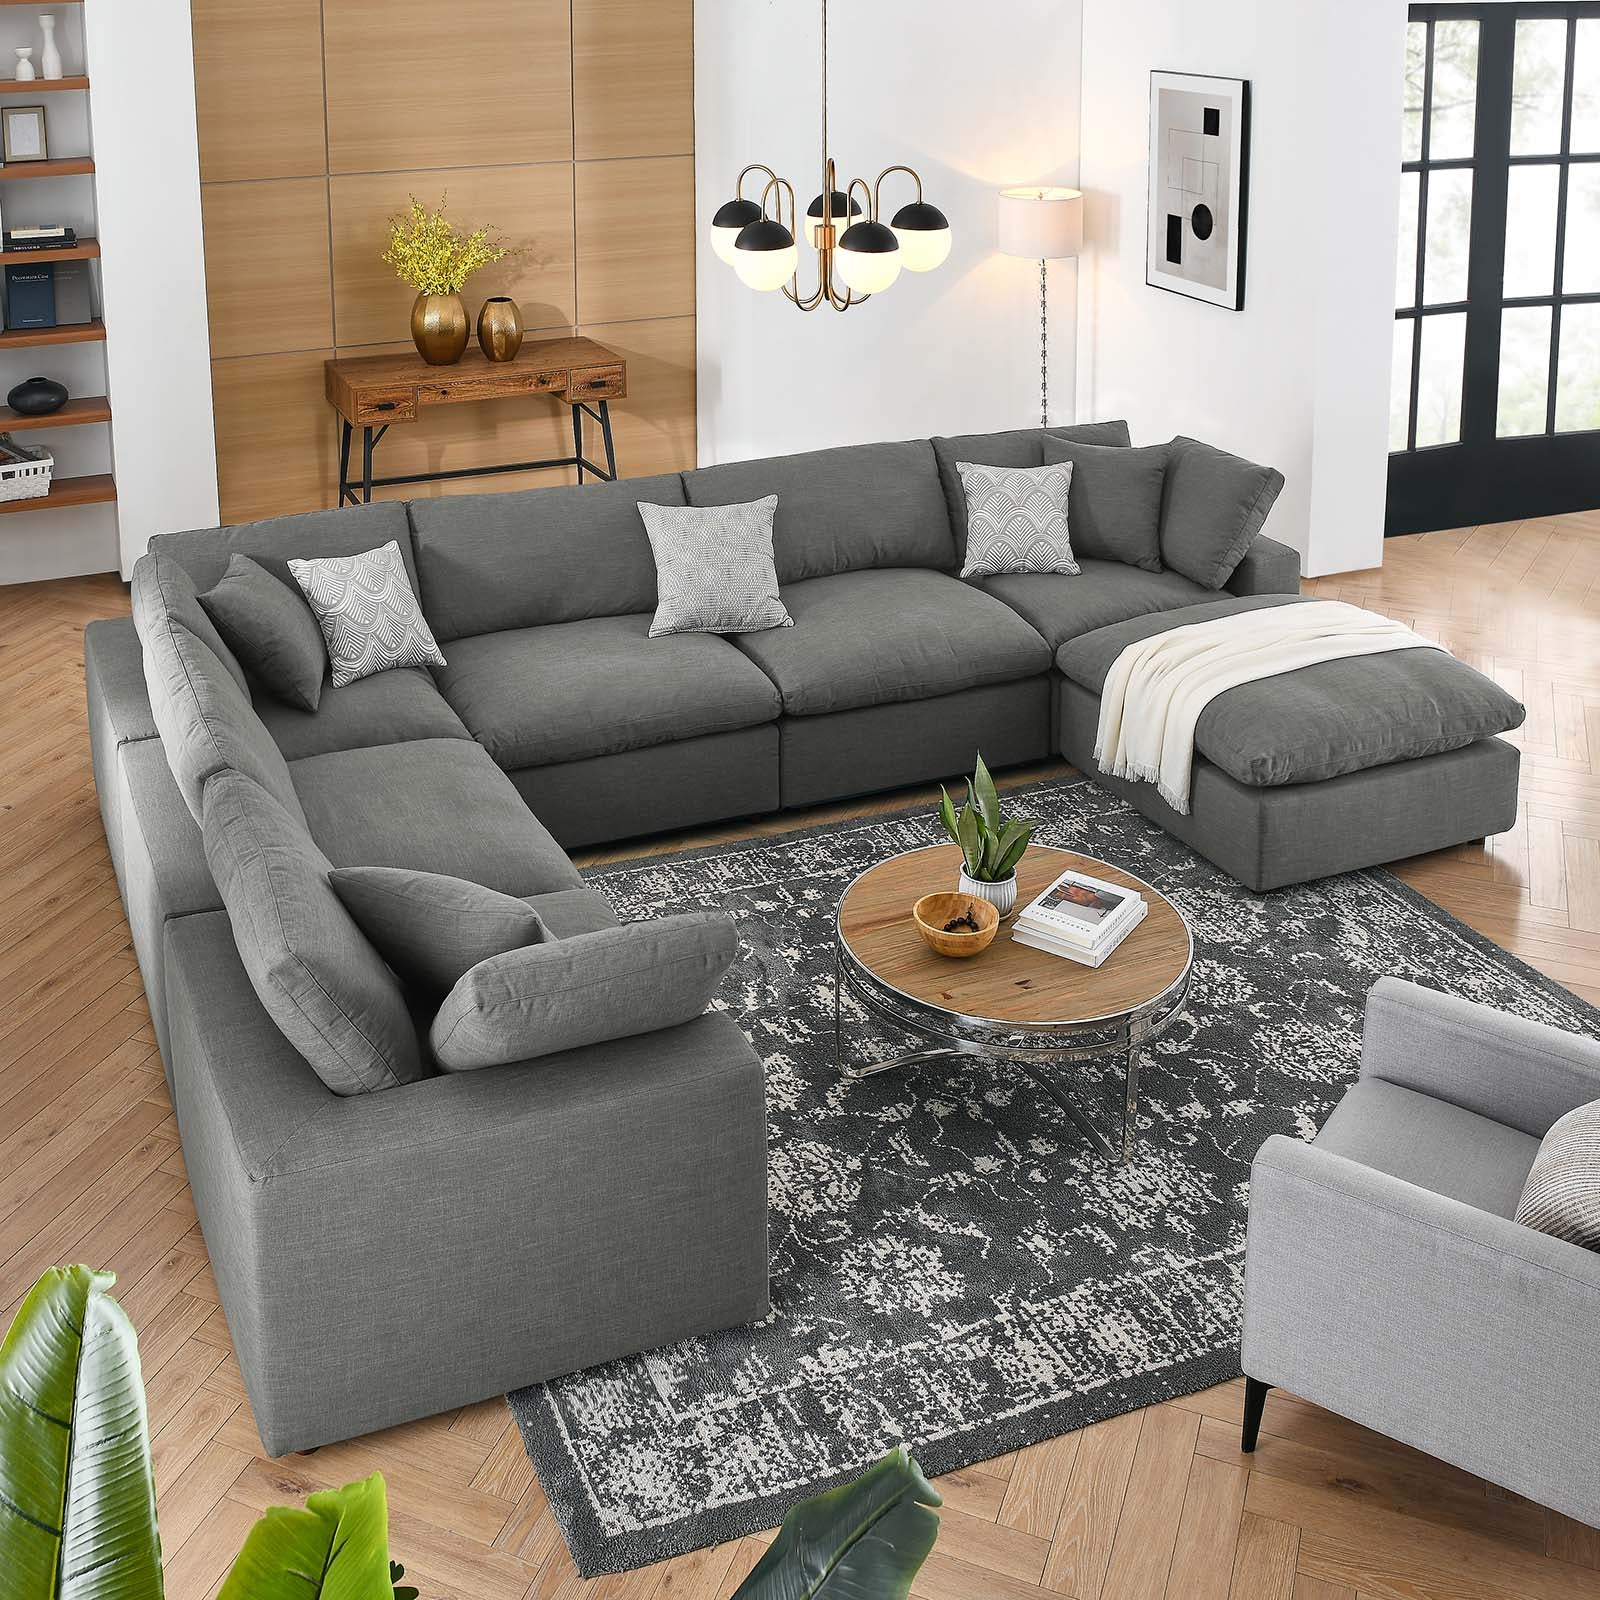 How to Arrange a Modular Sectional